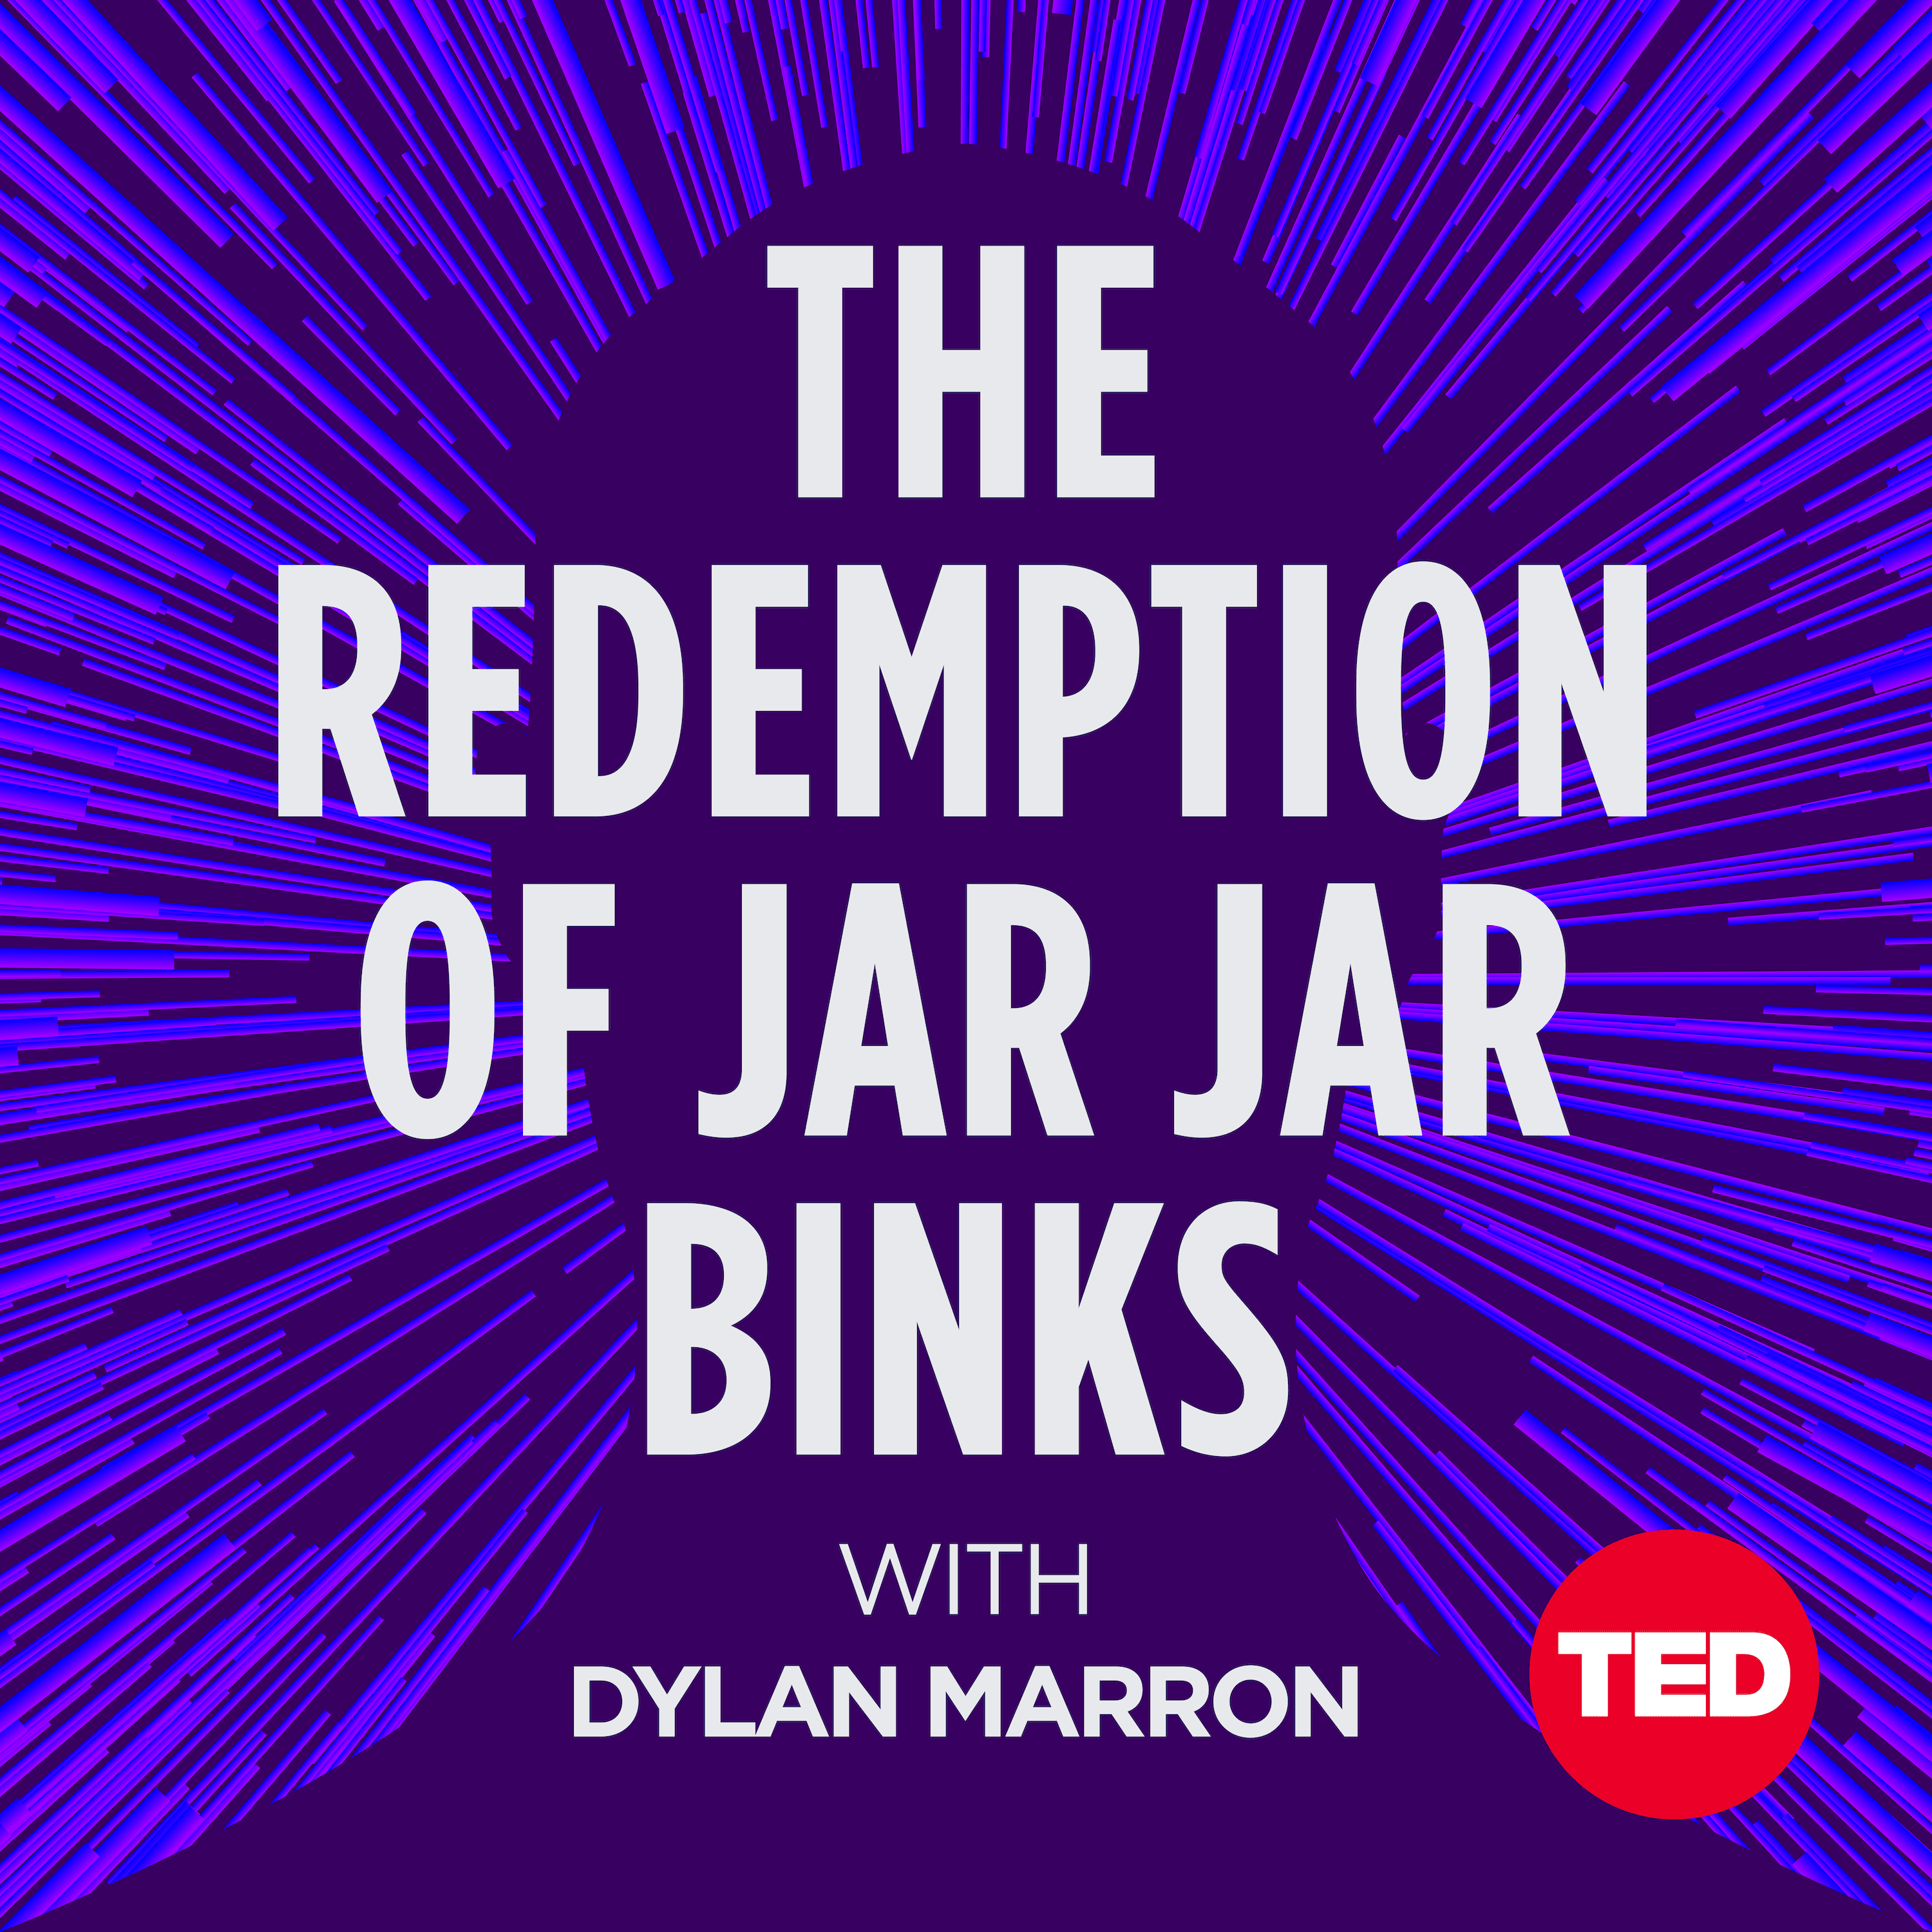 Thumbnail for "May the 4th Be With You: Introducing The Redemption of Jar Jar Binks".